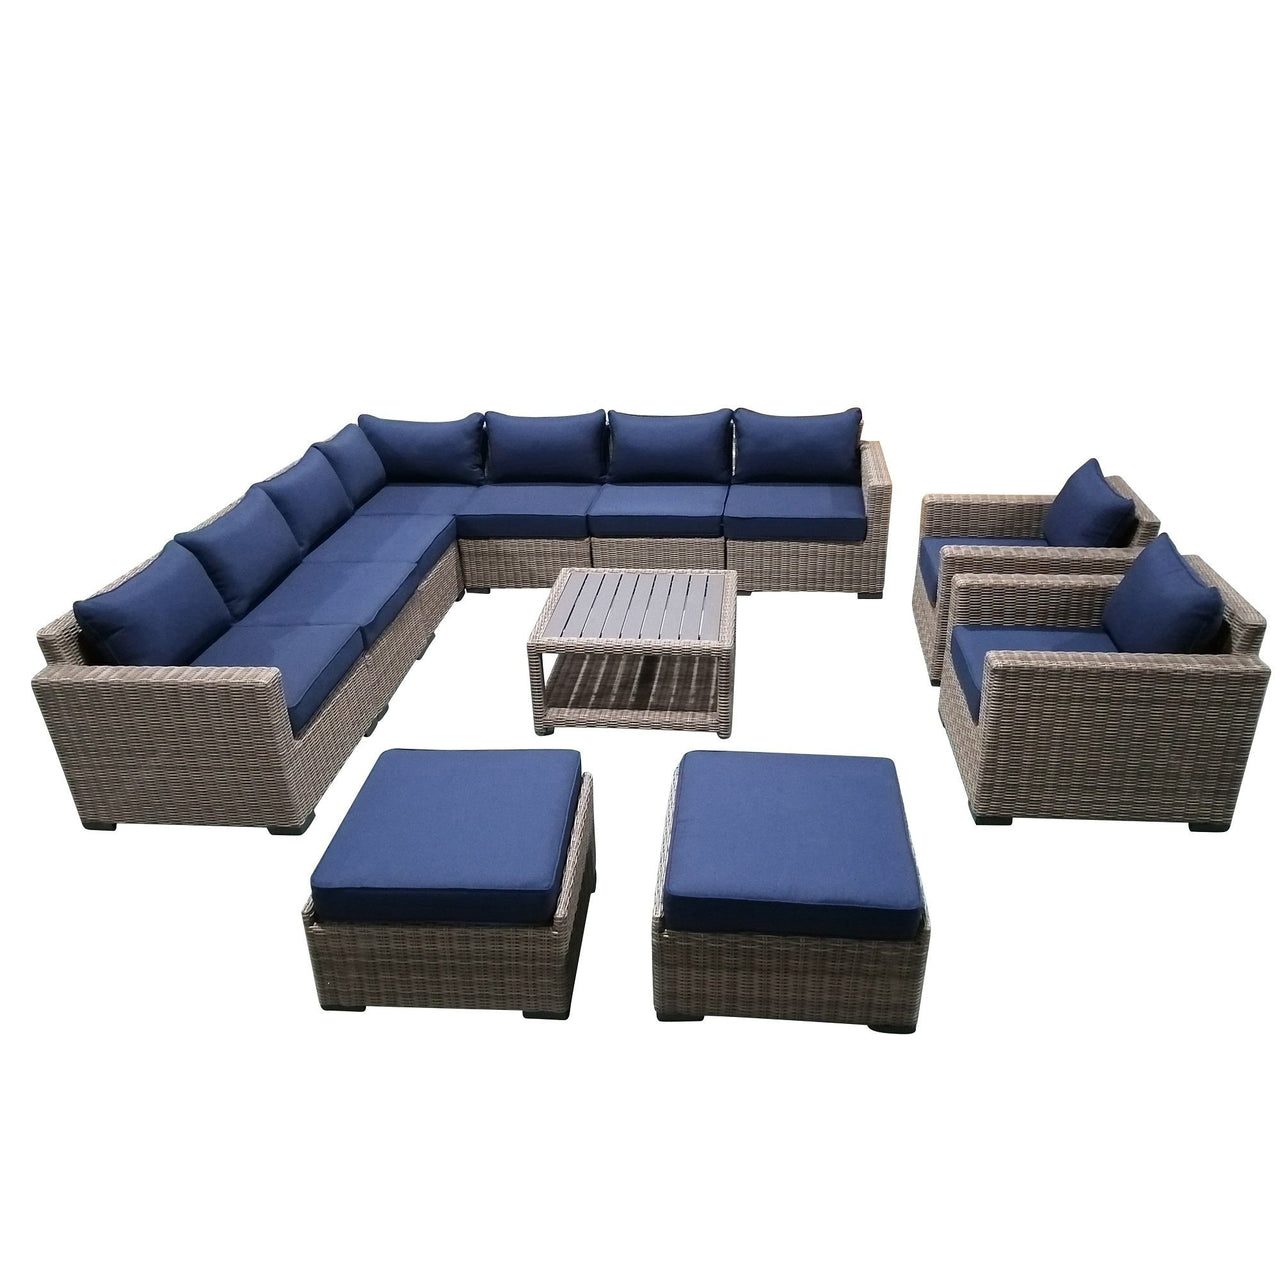 12-Piece Outdoor Pation Funiture Set Wicker Rattan Sectional Sofa Couch with Coffee Table Outdoor Furniture Casual Inc. 